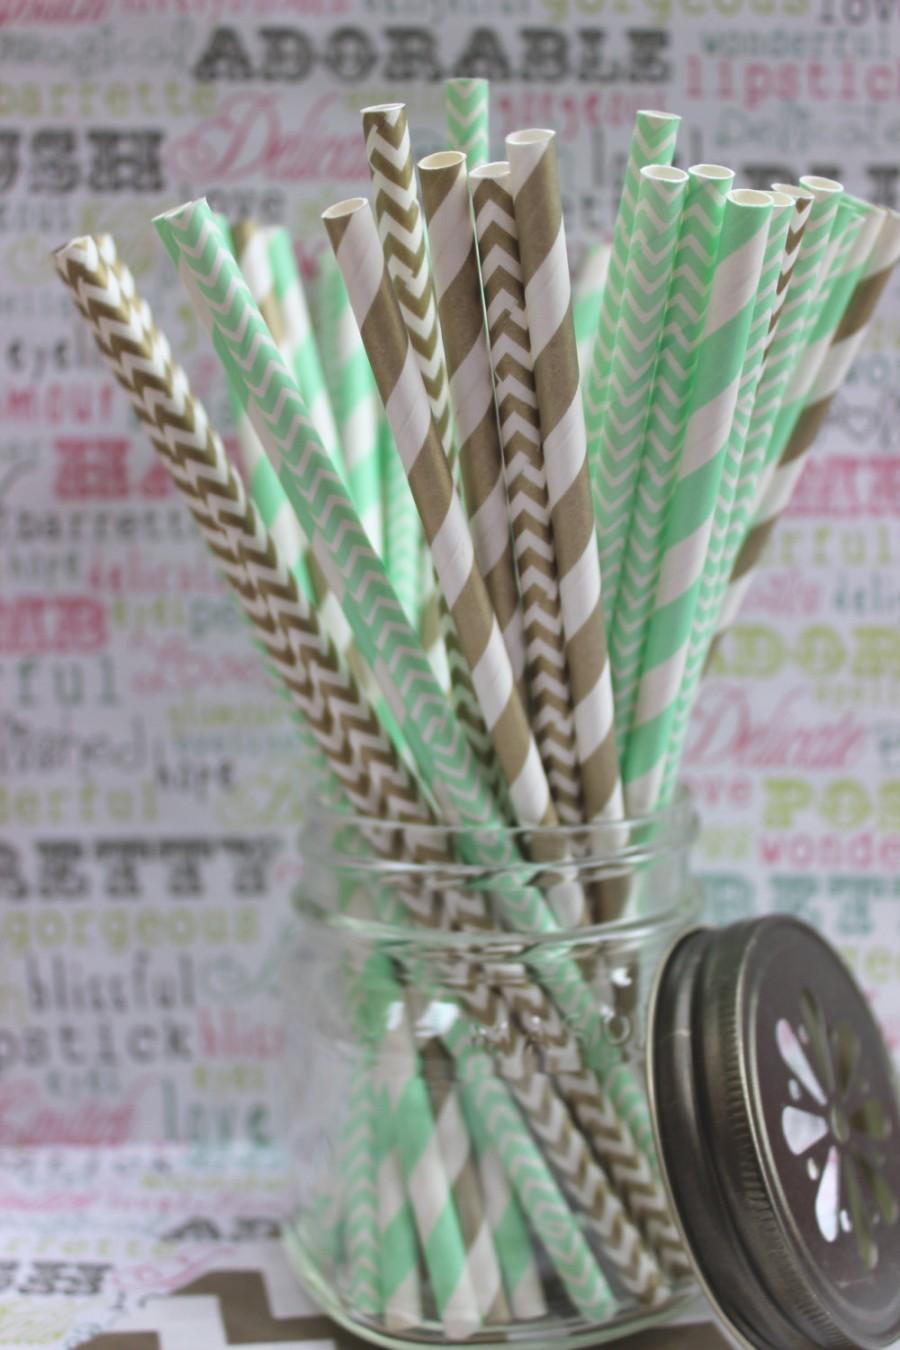 Mariage - 100 Gold and Mint Green Party Straws in Stripes and Chevron, Gold and Mint Wedding Straws with Printable DIY Flag Template - (50 ea. color)